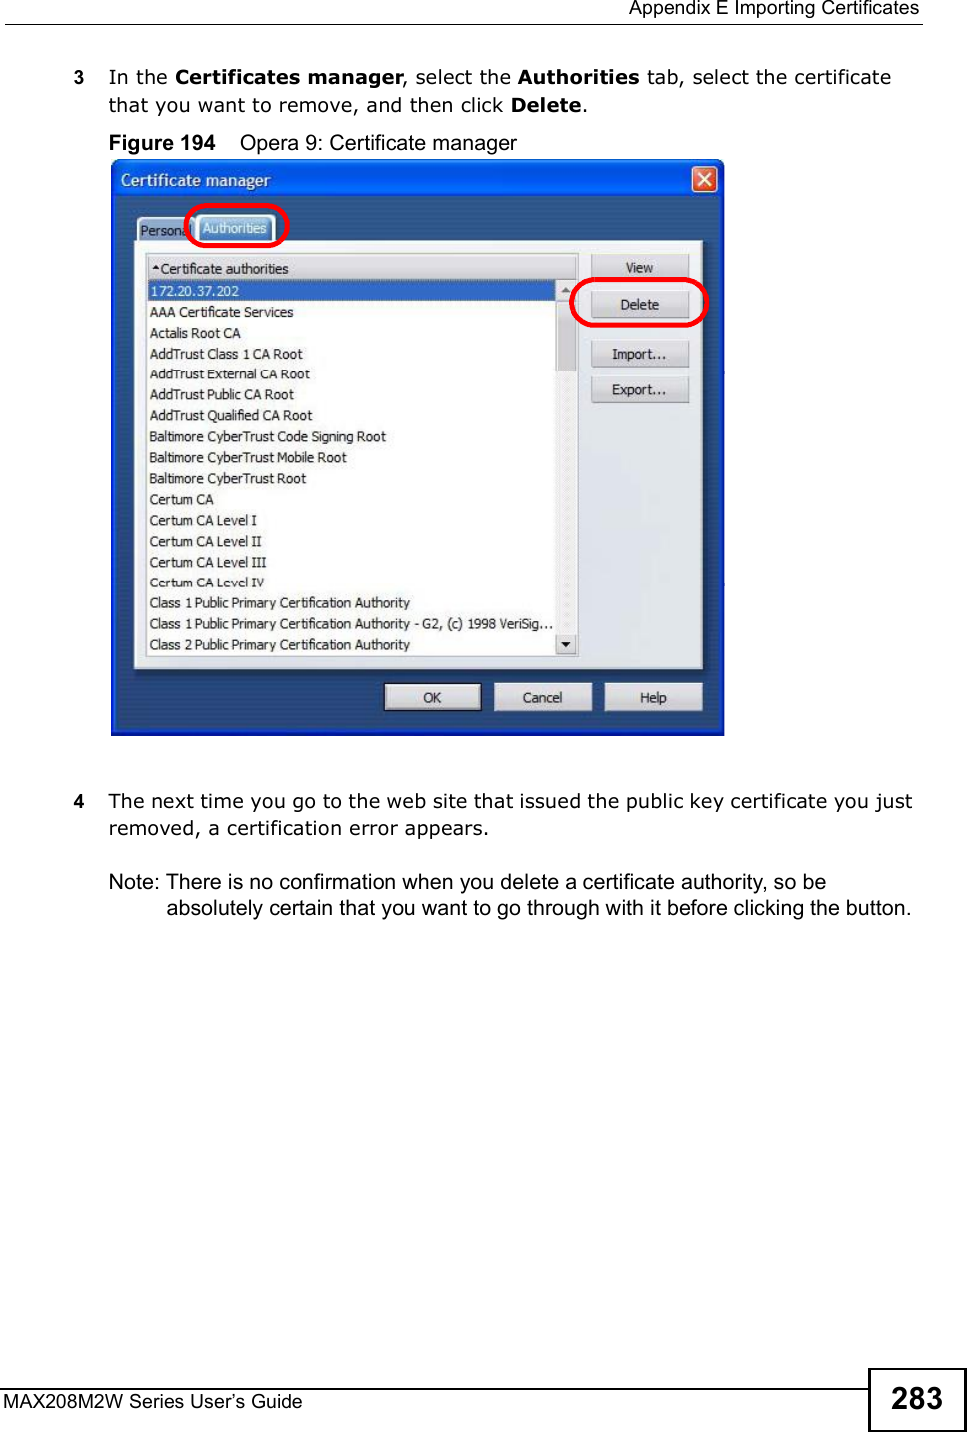  Appendix EImporting CertificatesMAX208M2W Series User s Guide 2833In the Certificates manager, select the Authorities tab, select the certificate that you want to remove, and then click Delete.Figure 194    Opera 9: Certificate manager4The next time you go to the web site that issued the public key certificate you just removed, a certification error appears.Note: There is no confirmation when you delete a certificate authority, so be absolutely certain that you want to go through with it before clicking the button.